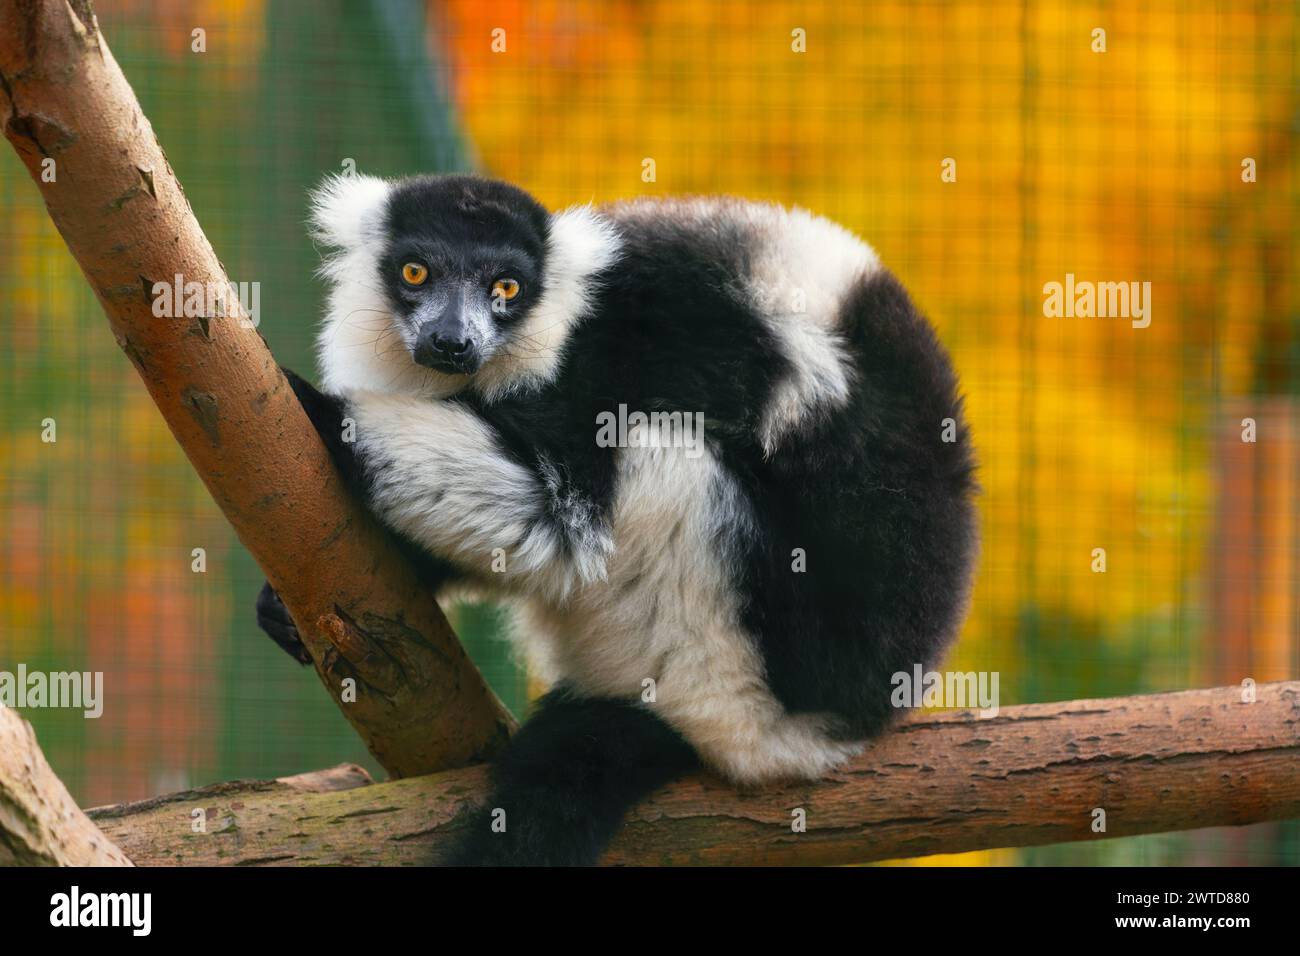 Black-and-white ruffed lemur (Varecia variegata) sitting on a tree and looking to the camera. It is an endangered species endemic to Madagascar. Stock Photo